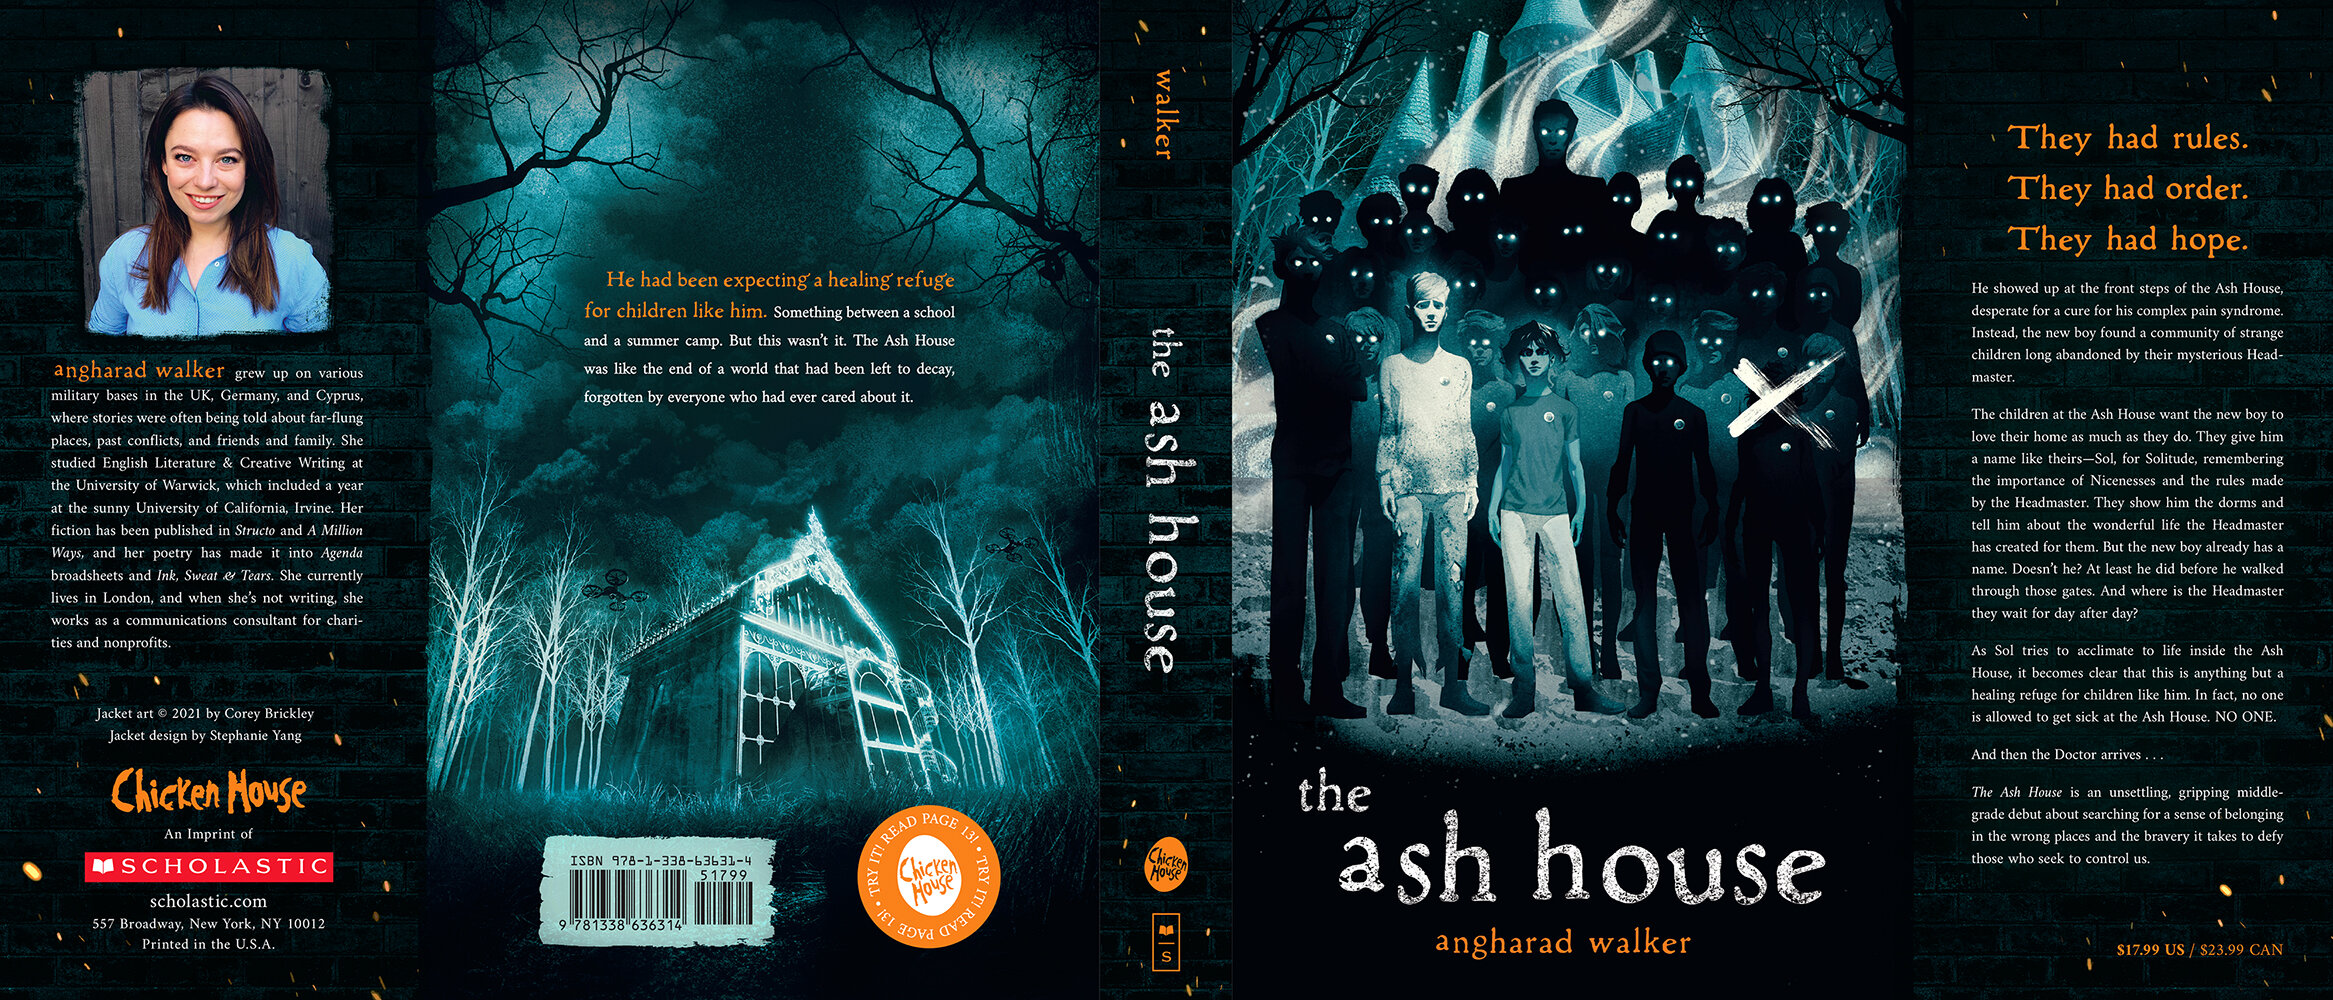 The Ash House by Angharad Walker